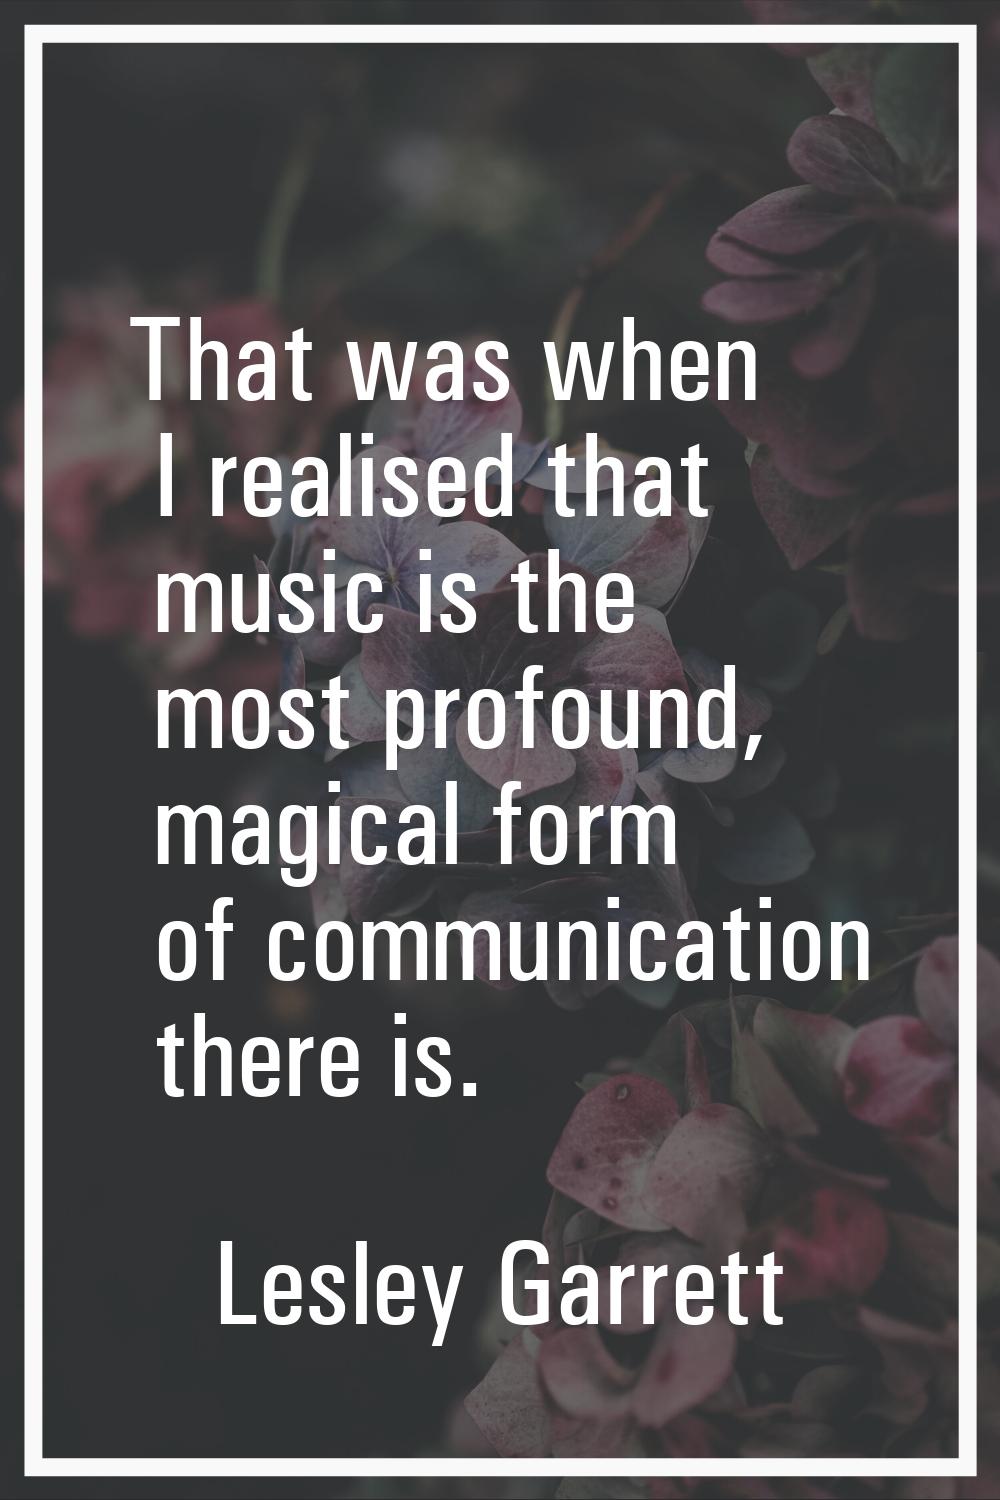 That was when I realised that music is the most profound, magical form of communication there is.